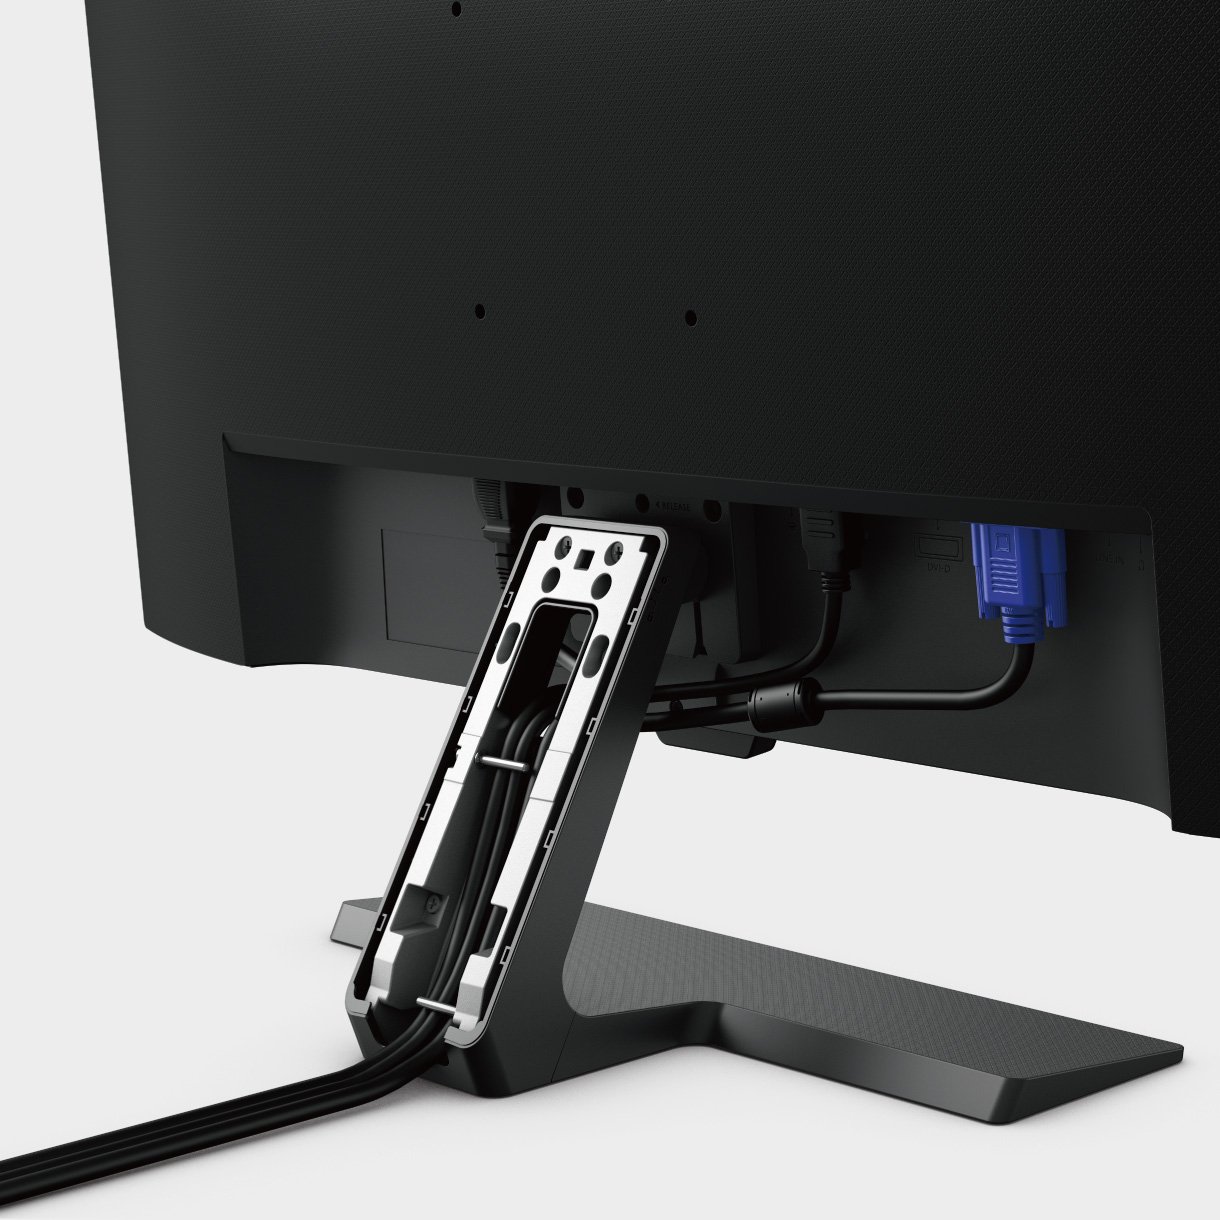 benq gw2480l with invisible cable management system hides all wires inside the monitor stand for cleanest look